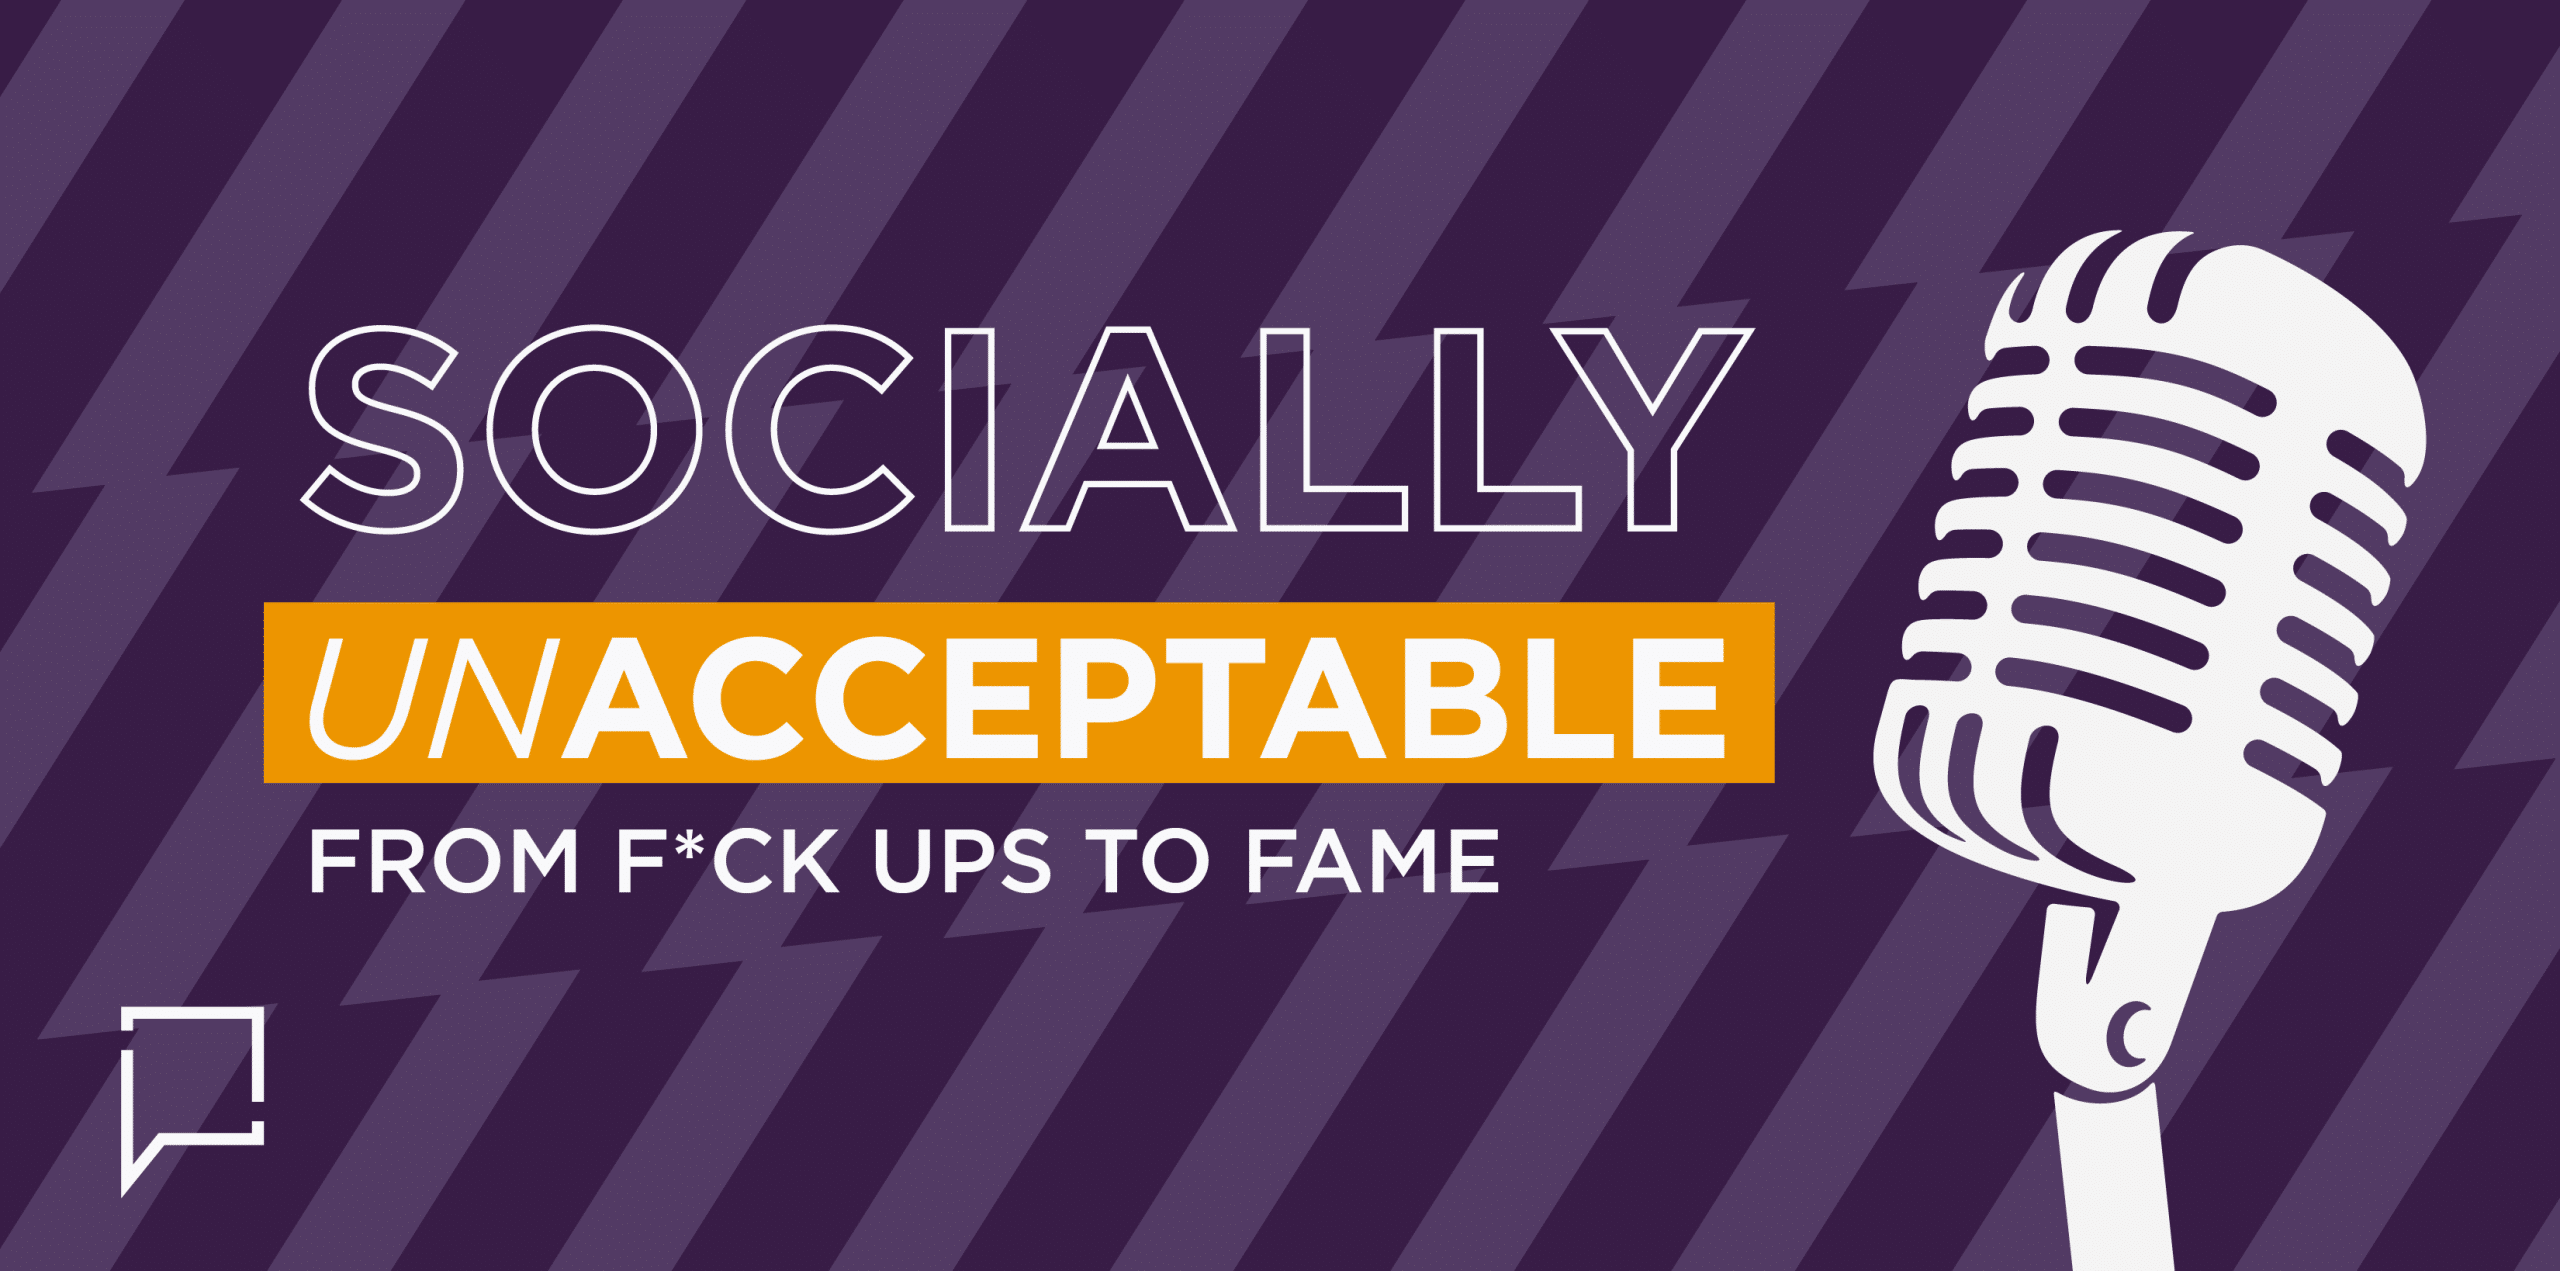 Introducing the Prohibition Podcast: ‘Socially Unacceptable’ – making f*ck ups acceptable